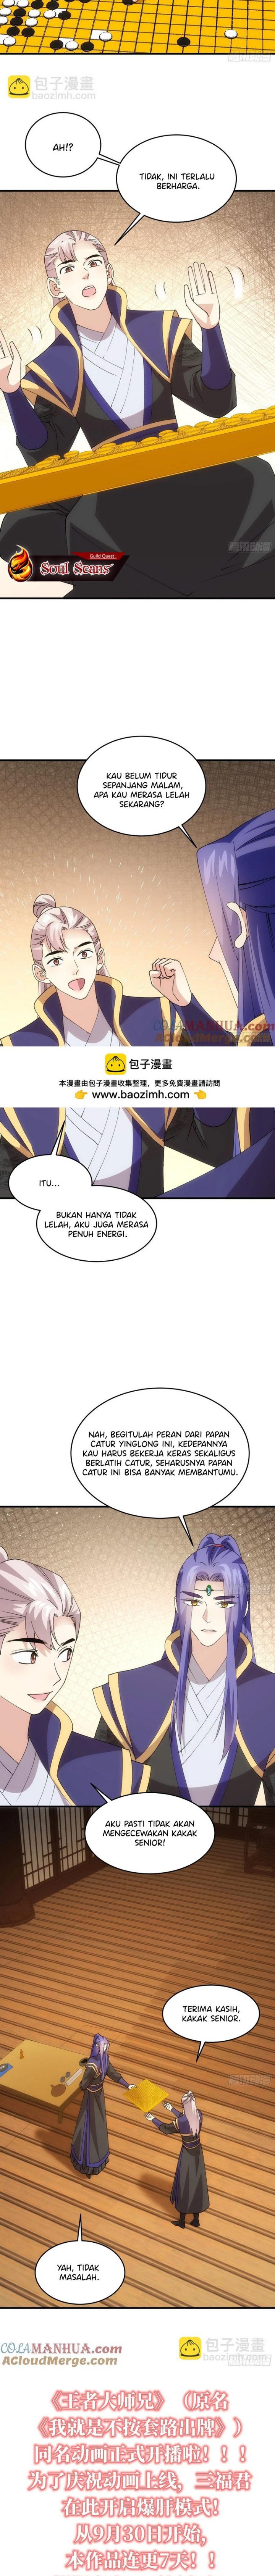 Dilarang COPAS - situs resmi www.mangacanblog.com - Komik i just dont play the card according to the routine 201 - chapter 201 202 Indonesia i just dont play the card according to the routine 201 - chapter 201 Terbaru 10|Baca Manga Komik Indonesia|Mangacan